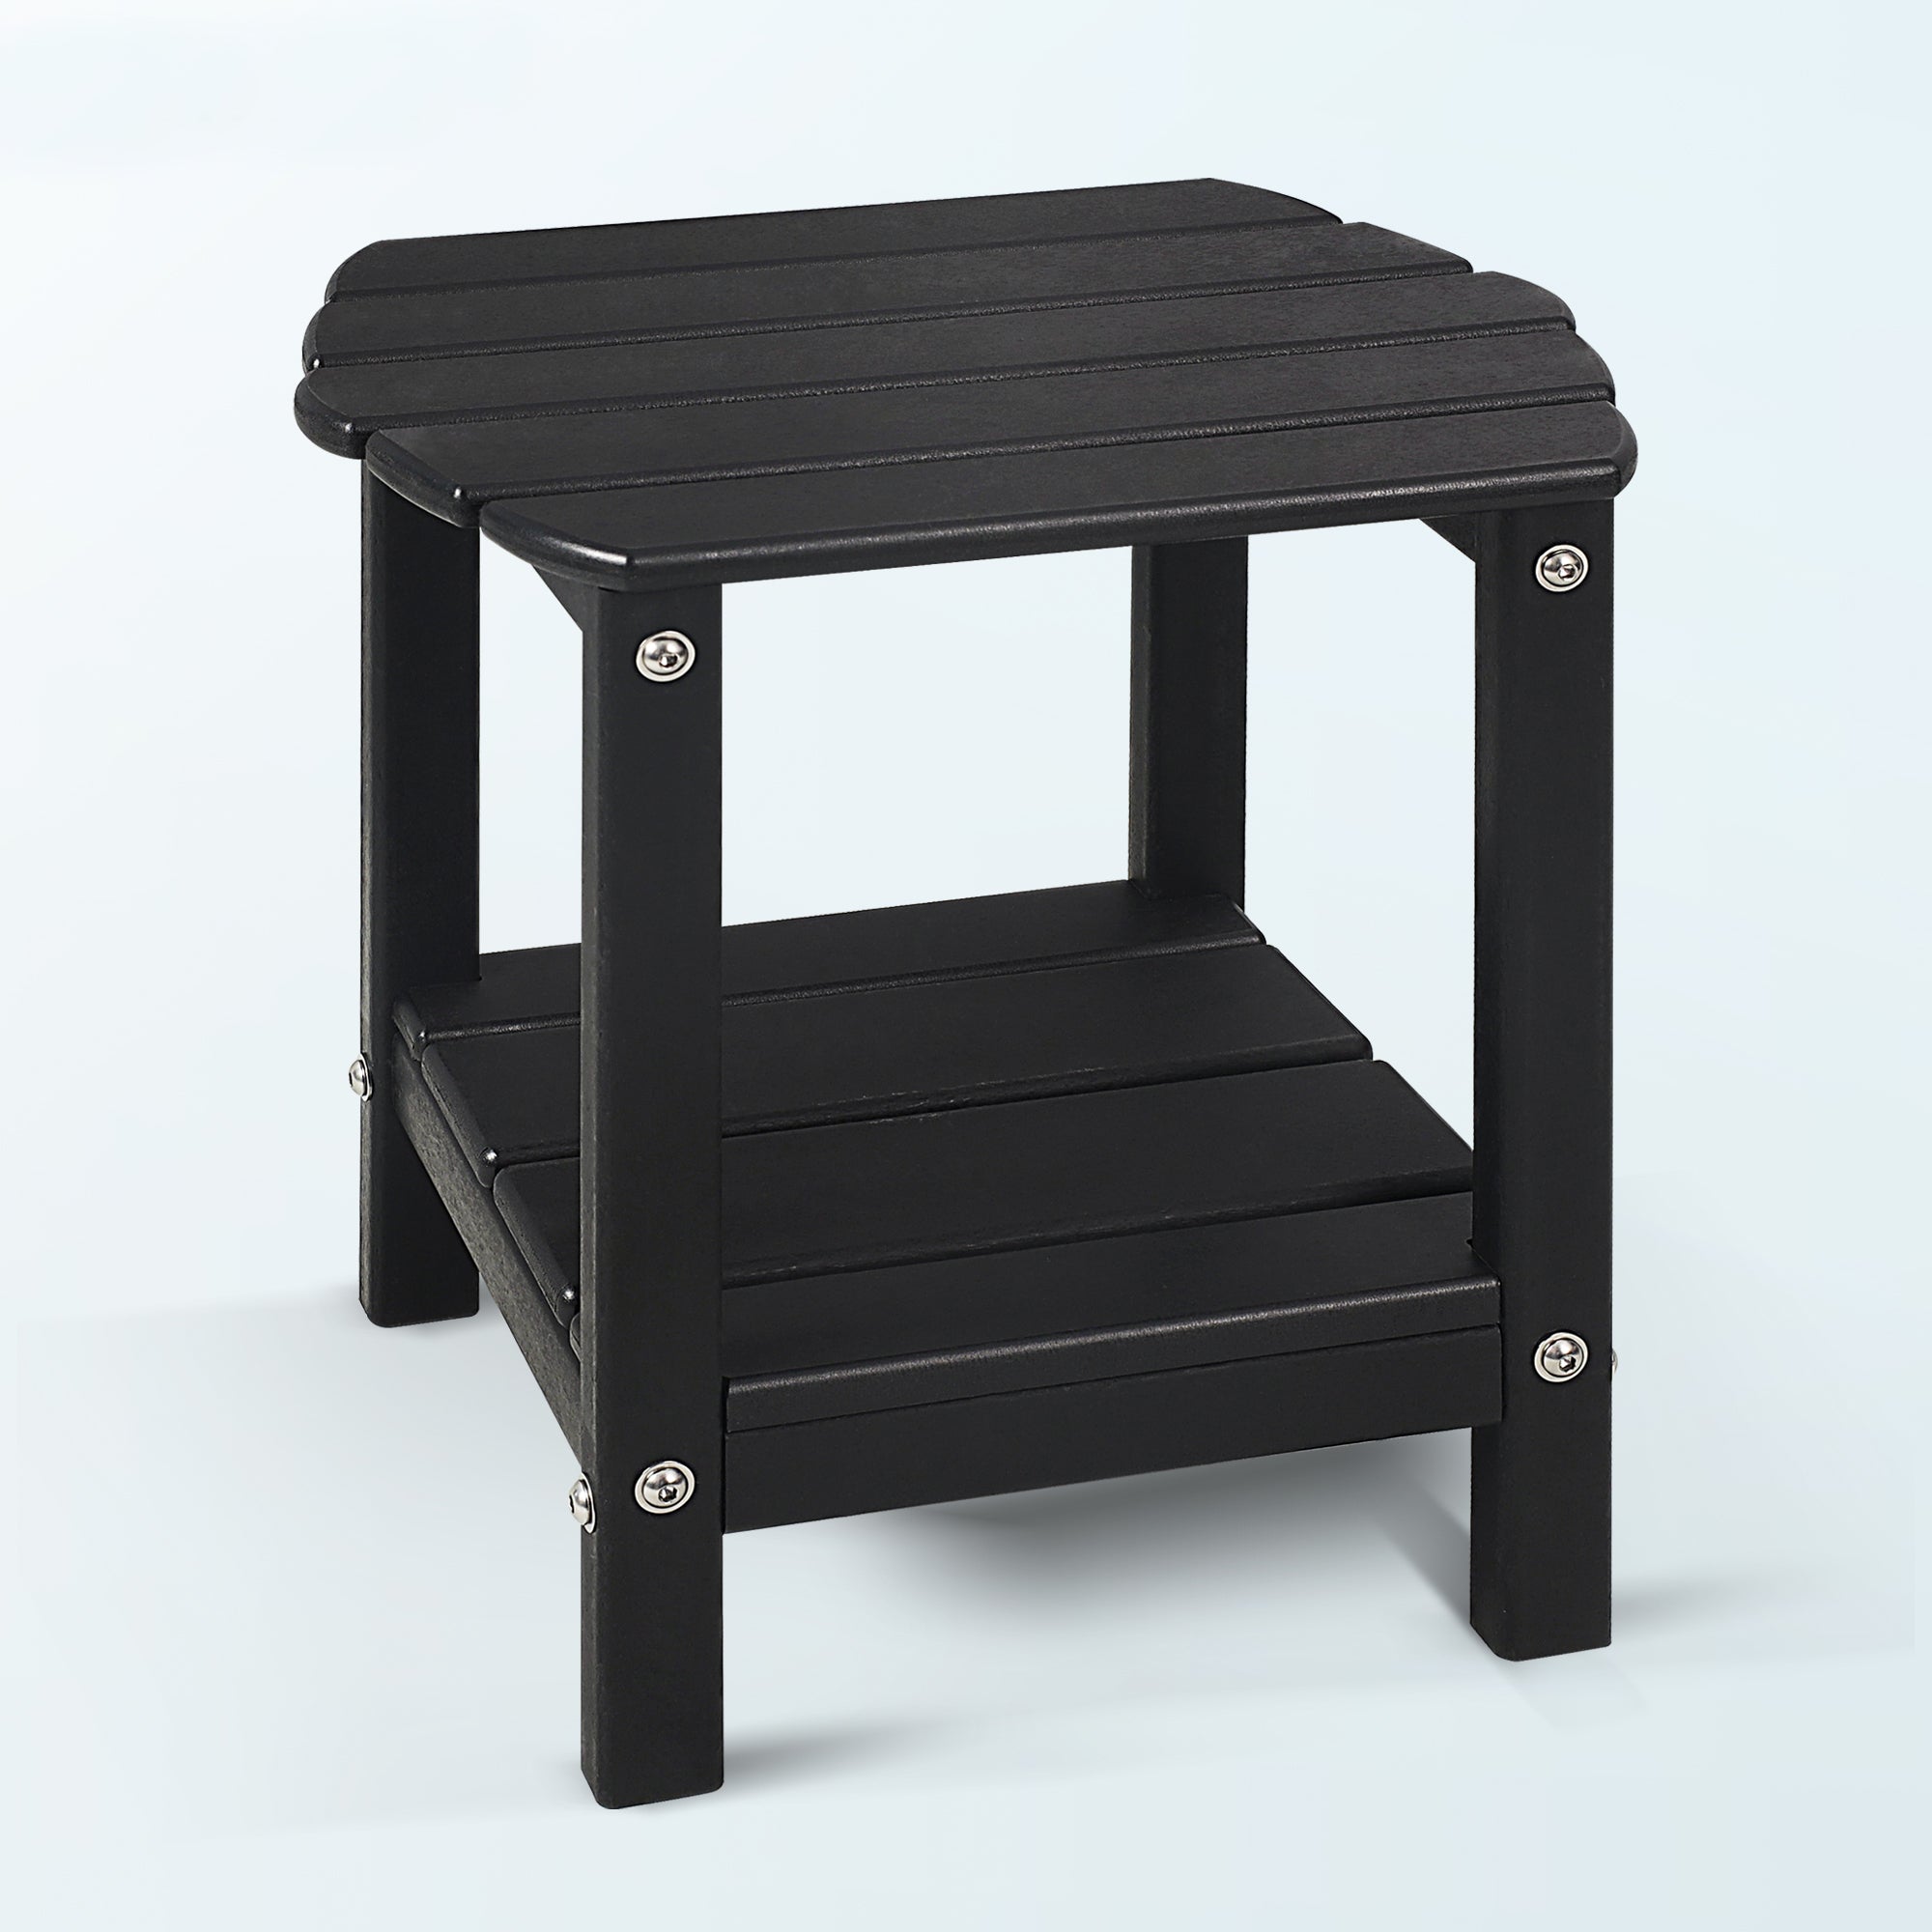 Fruiteam Patio Garden Side Table With 2 Layer Storage,Outdoor End Tables for Your Adirondack Chair